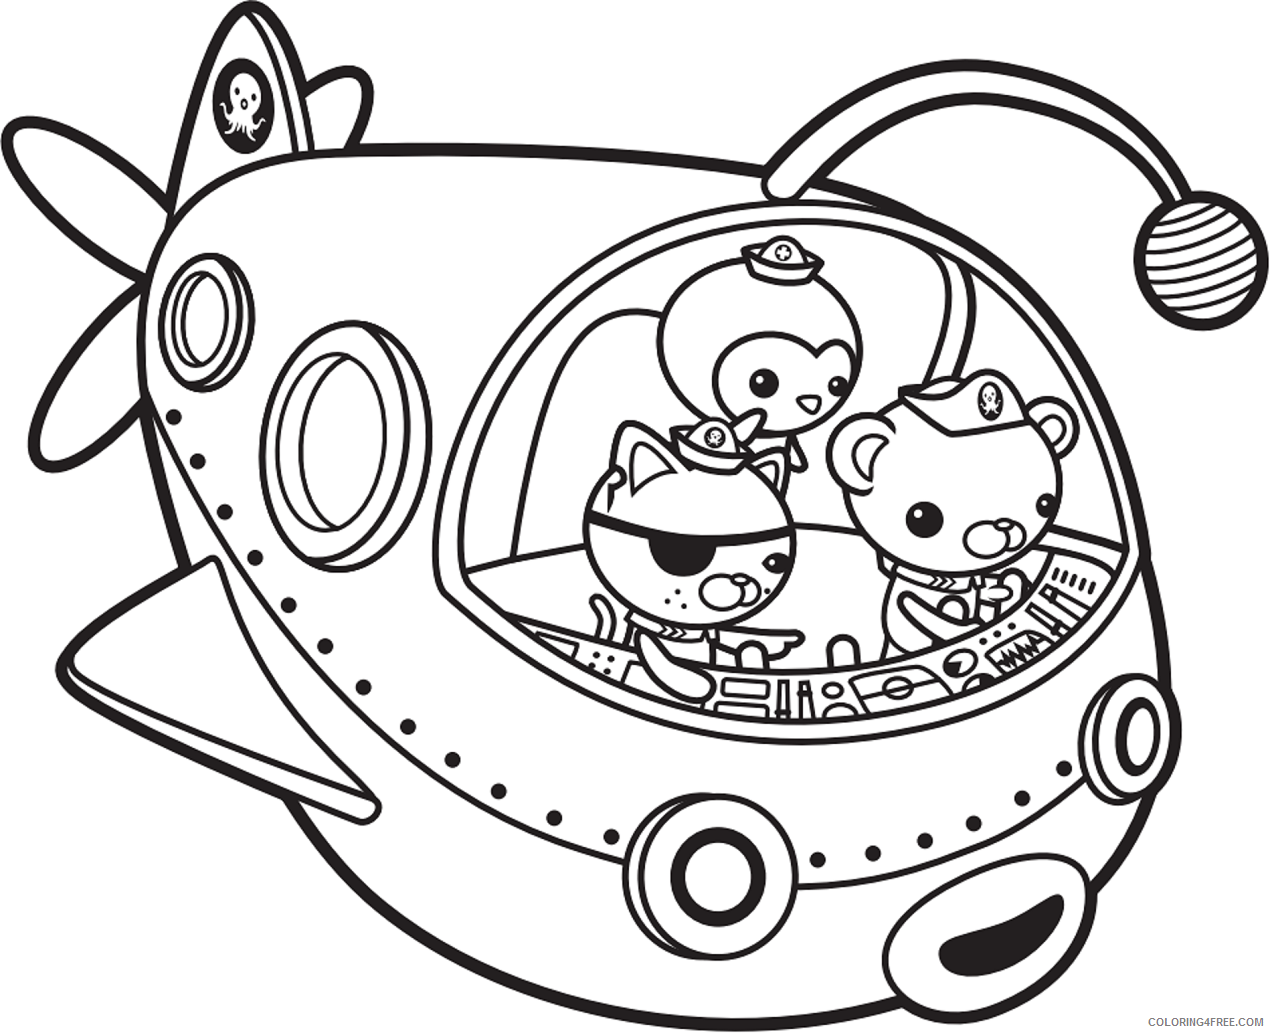 The Octonauts Coloring Pages TV Film submarine a4 Printable 2020 09404 Coloring4free